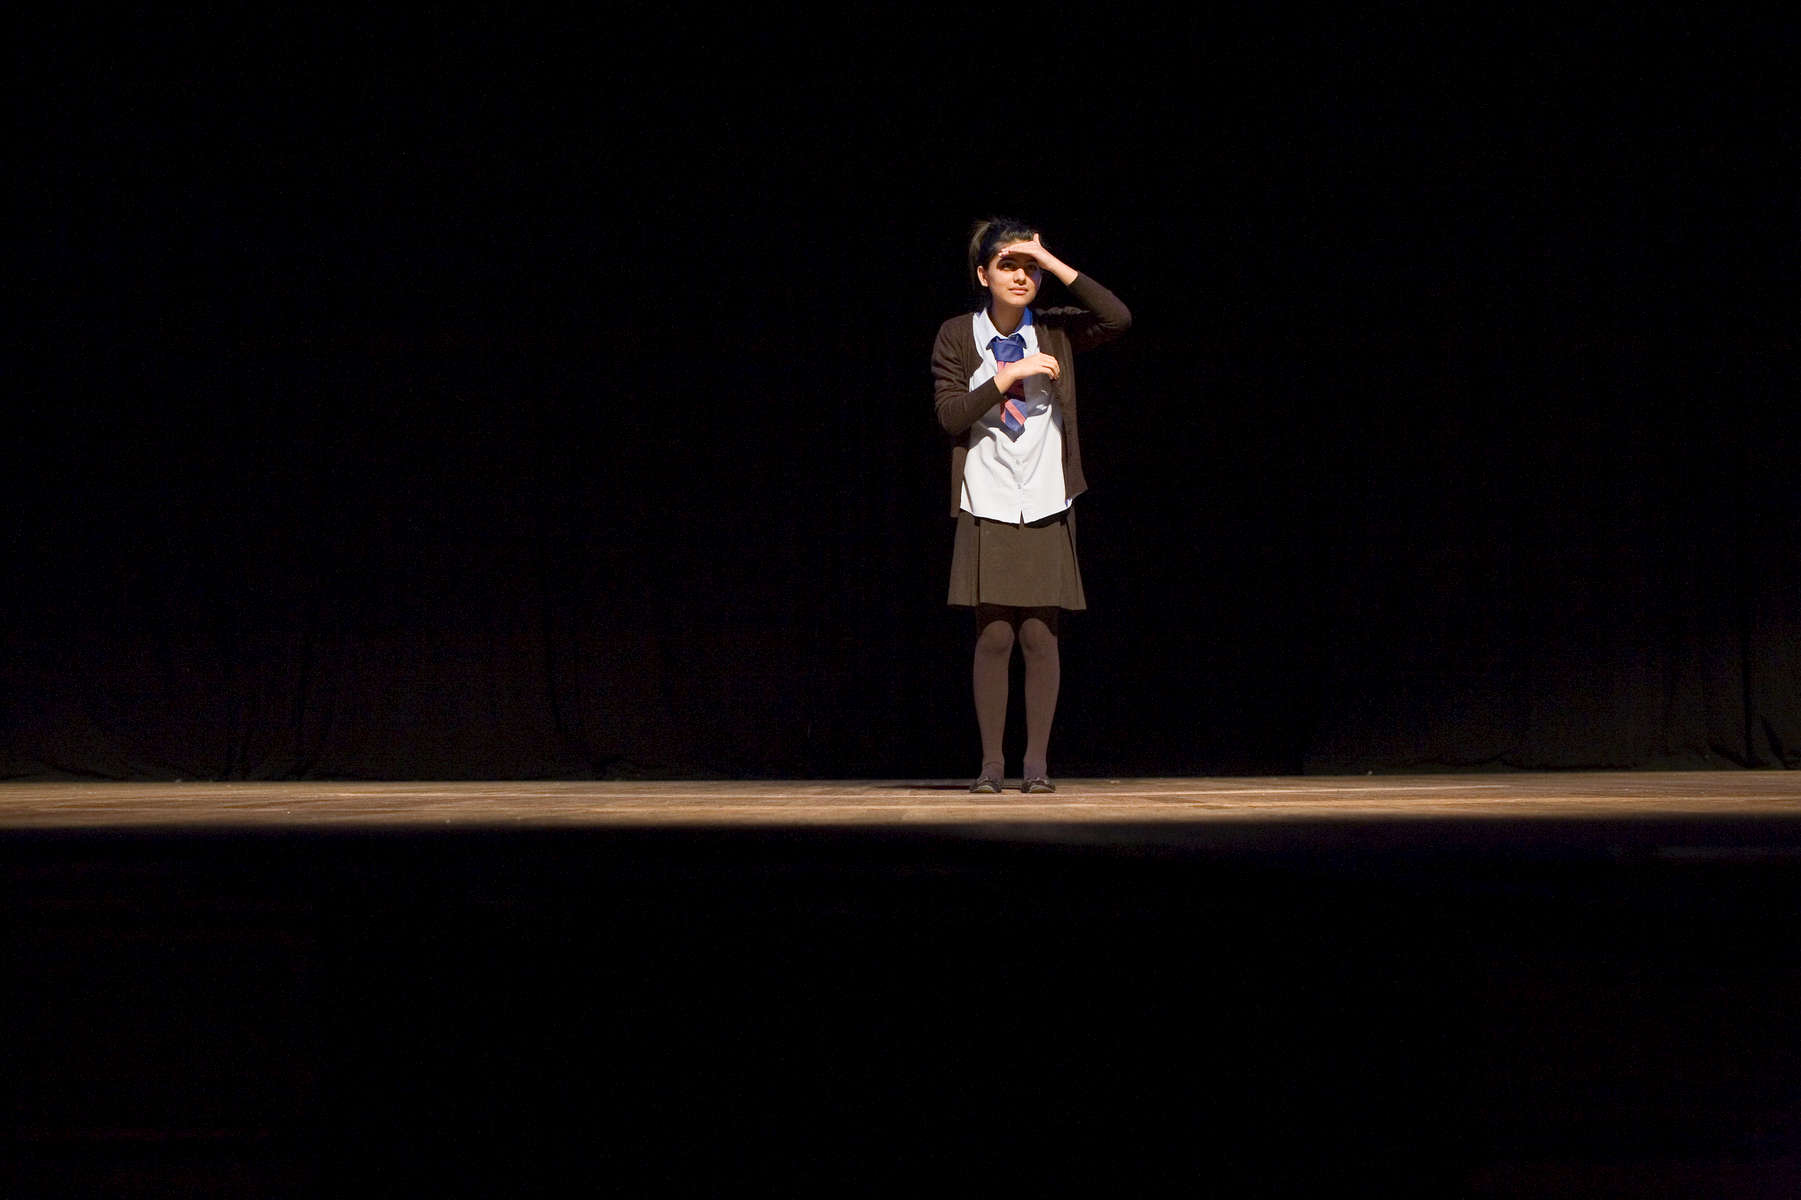 Laiba Abassi on stage at The Beck Theare during a rehearsal for Shakepeare's 'Comedy of Errors' in which she was playing Adriana. The play was part of the 10th anniverary Shakespeare School Festival, the UK's largest youth drama festival with over 650 schools involved including Villers Hgh School where Laiba is a pupil.Villiers High School is in the town of Southall. It has a very wide ethnic diversity. 45 different 1st spoken languages are listed among the 1208 pupils. 25 ethnic groups are represented with Indian, Pakistani and Black-Somali the three highest.Southall is a suburban district of West London, England. The town has one of the largest concentrations of South Asian people outside of the Indian sub-continent. Over 55% os Southall's population of 70,000 is Indian/Pakistani, with less than 10% being White British.